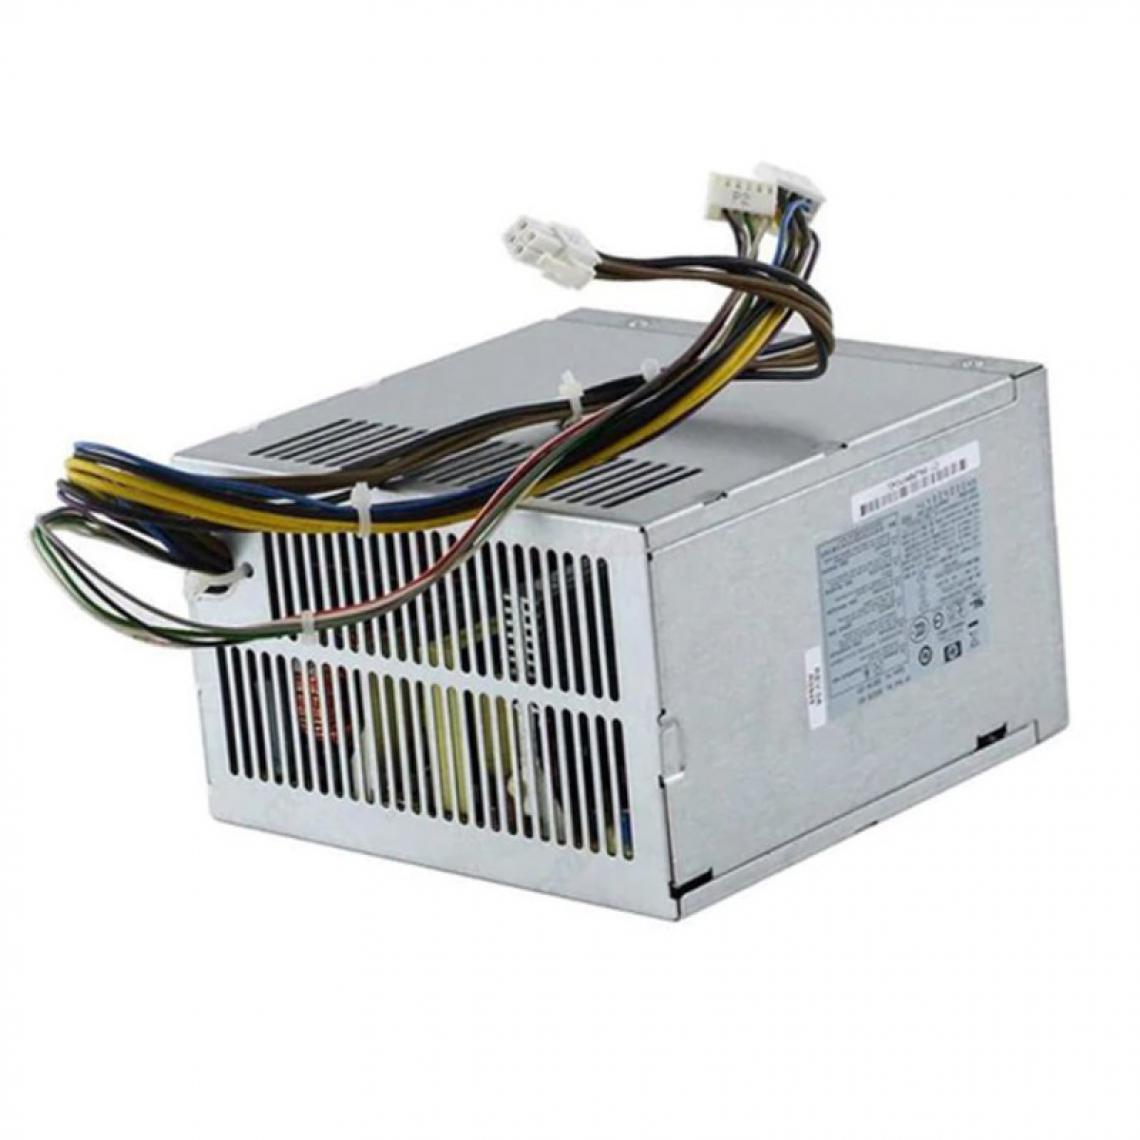 Hp - Alimentation PC HP PS-4321-9HP 503377-001 508153-001 320W 8000 8100 8200 8300 MT - Alimentation modulaire